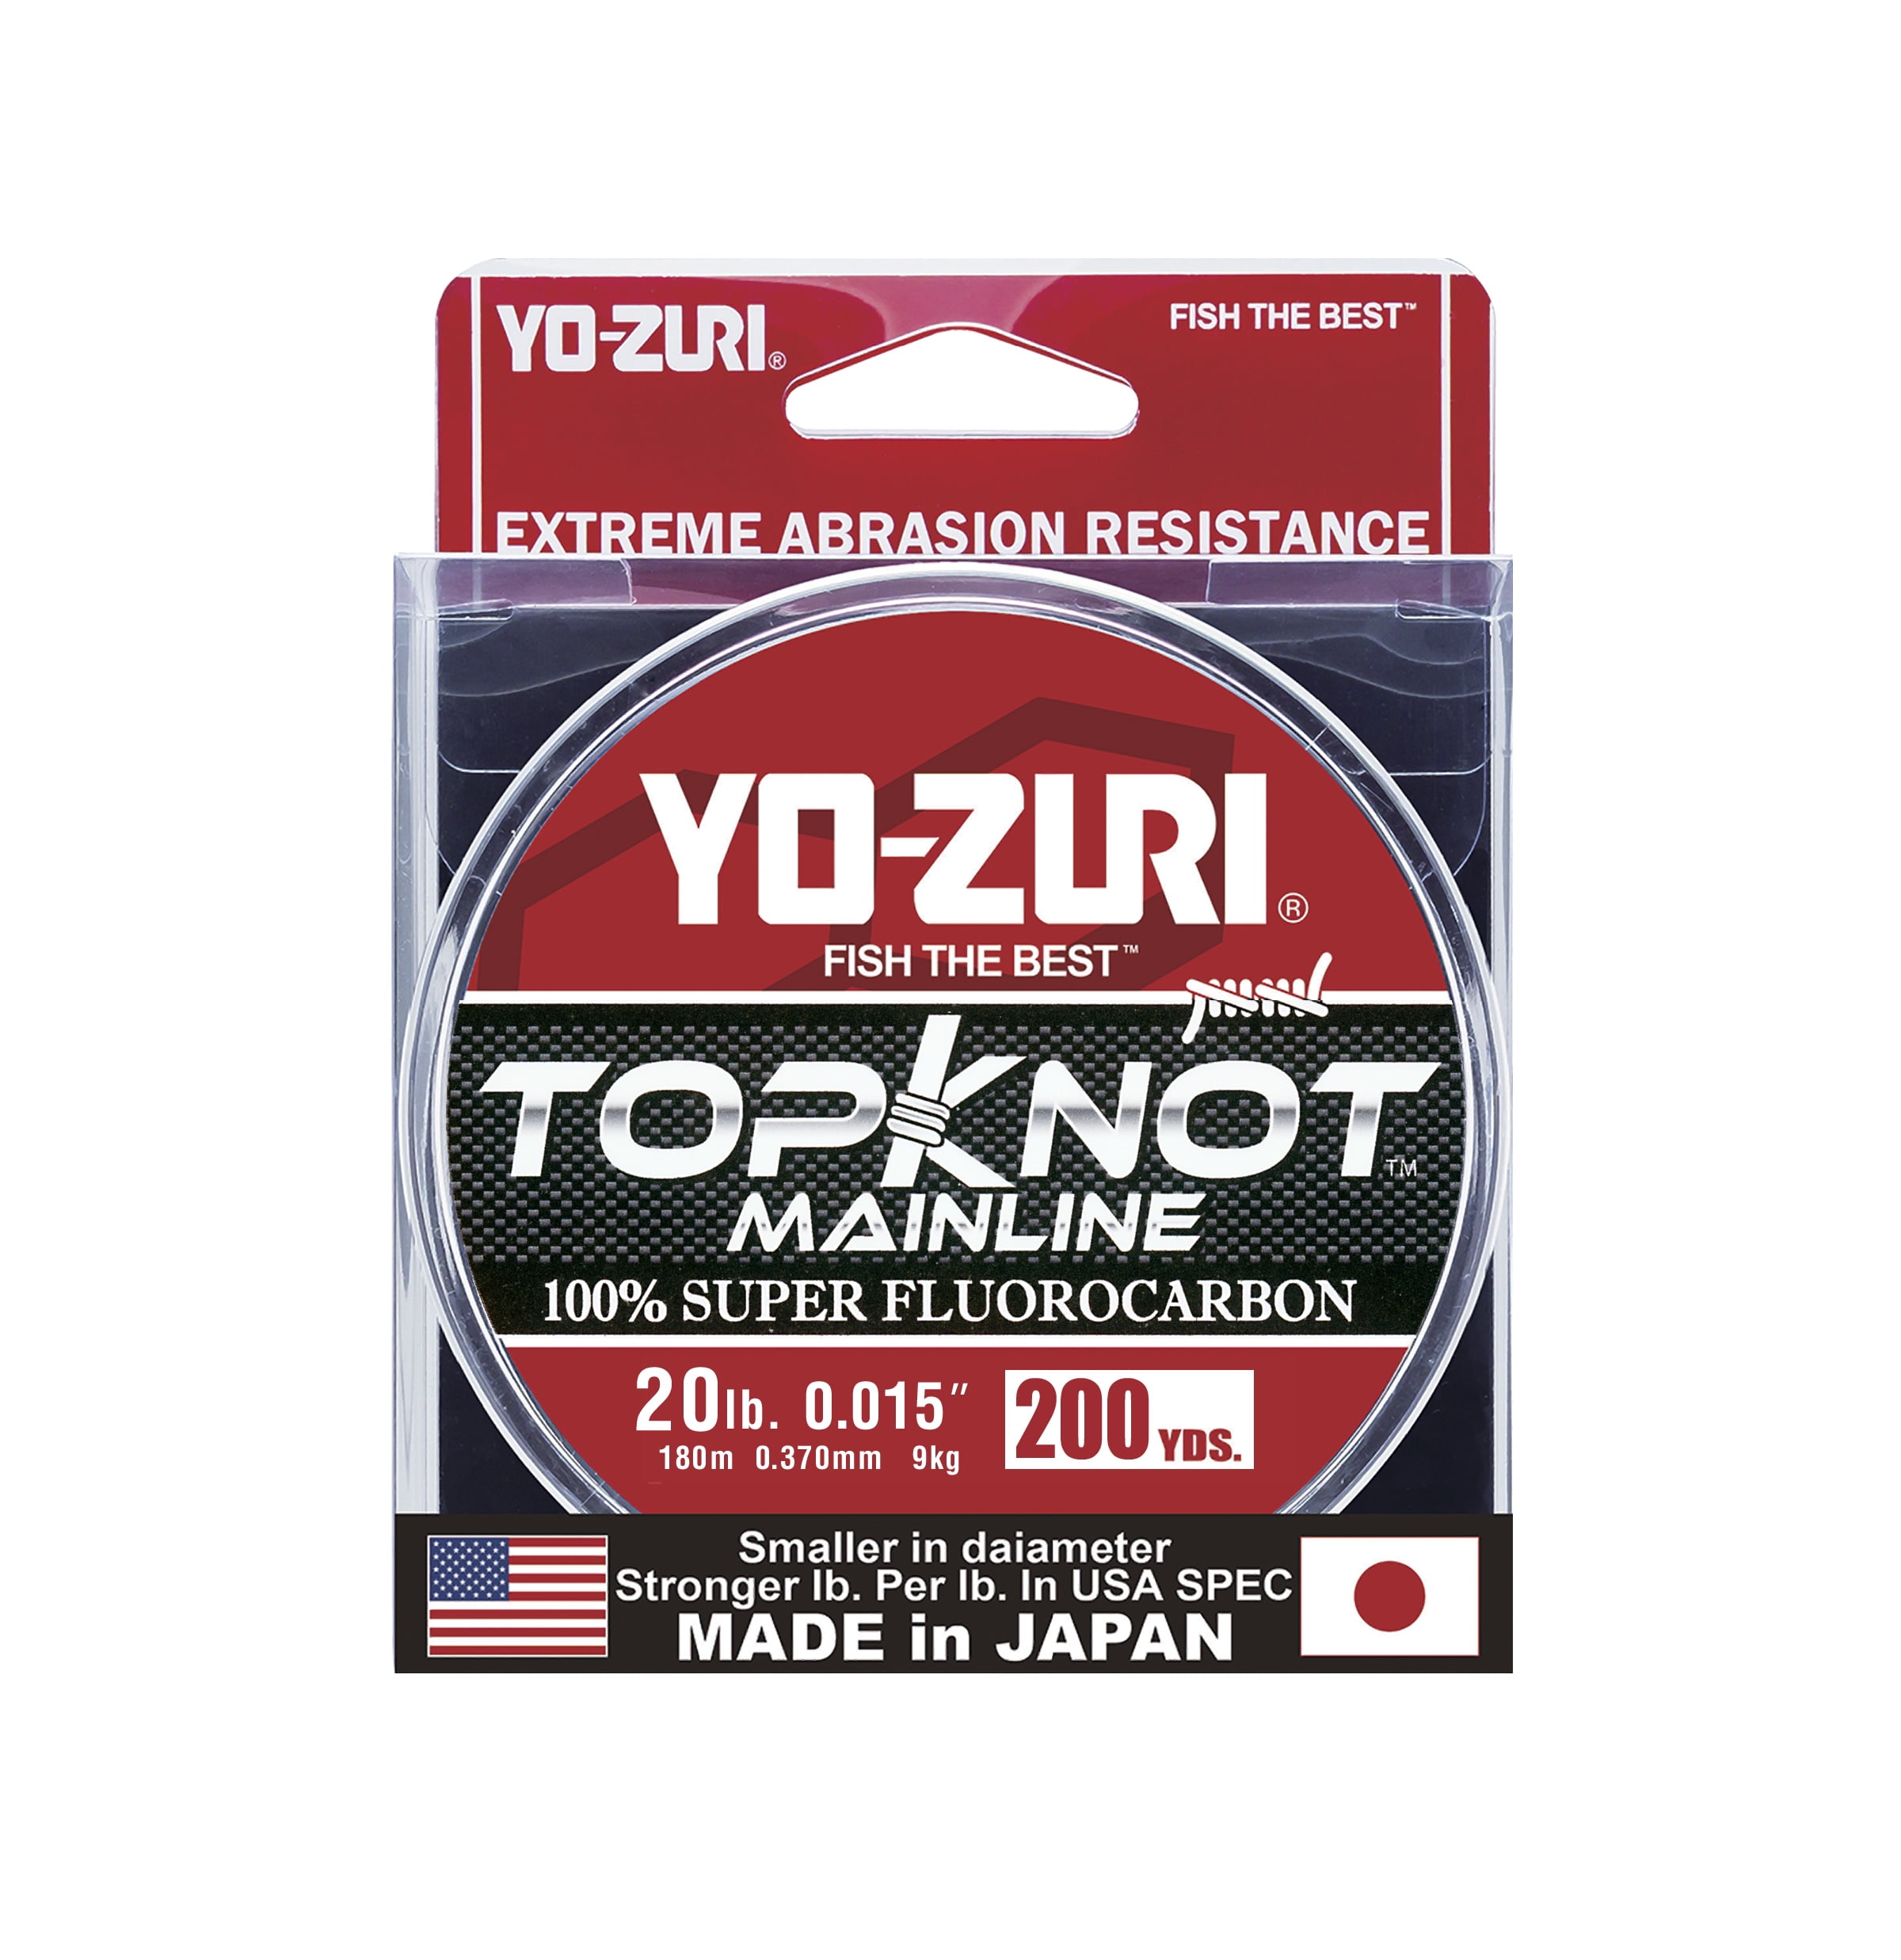 YO-ZURI TOPKNOT LEADER SUPER FLUOROCARBON 150lb 30yd R1238-DP Disappearing Pink 